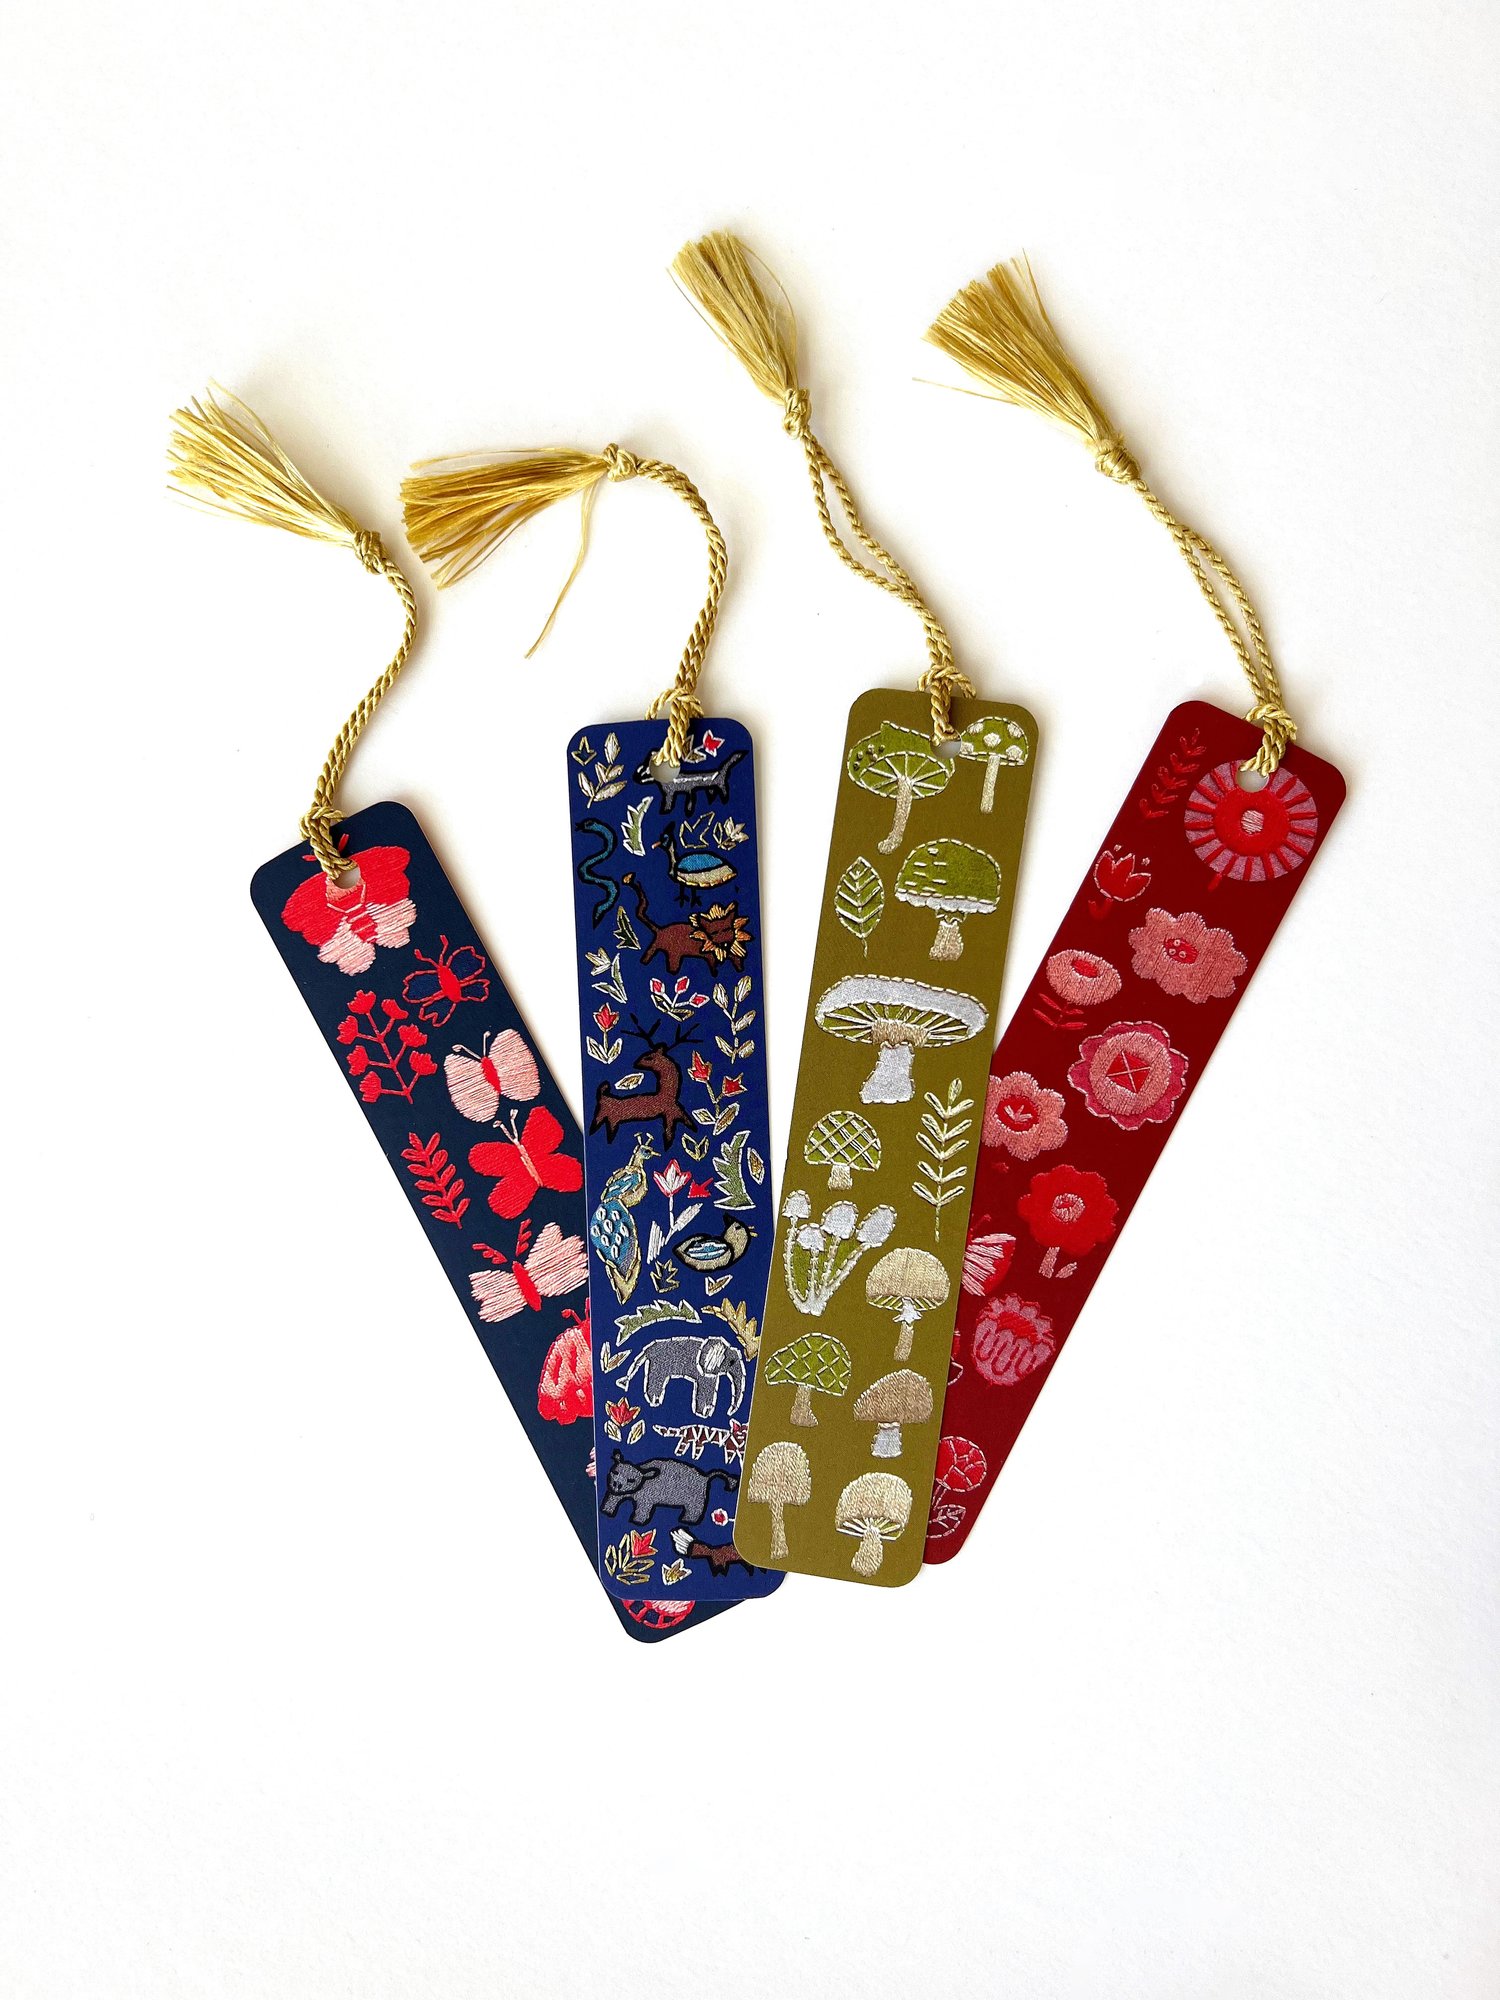 Wholesale AHADEMAKER 1 Set Rectangle Wood Bookmarks with Tassels 